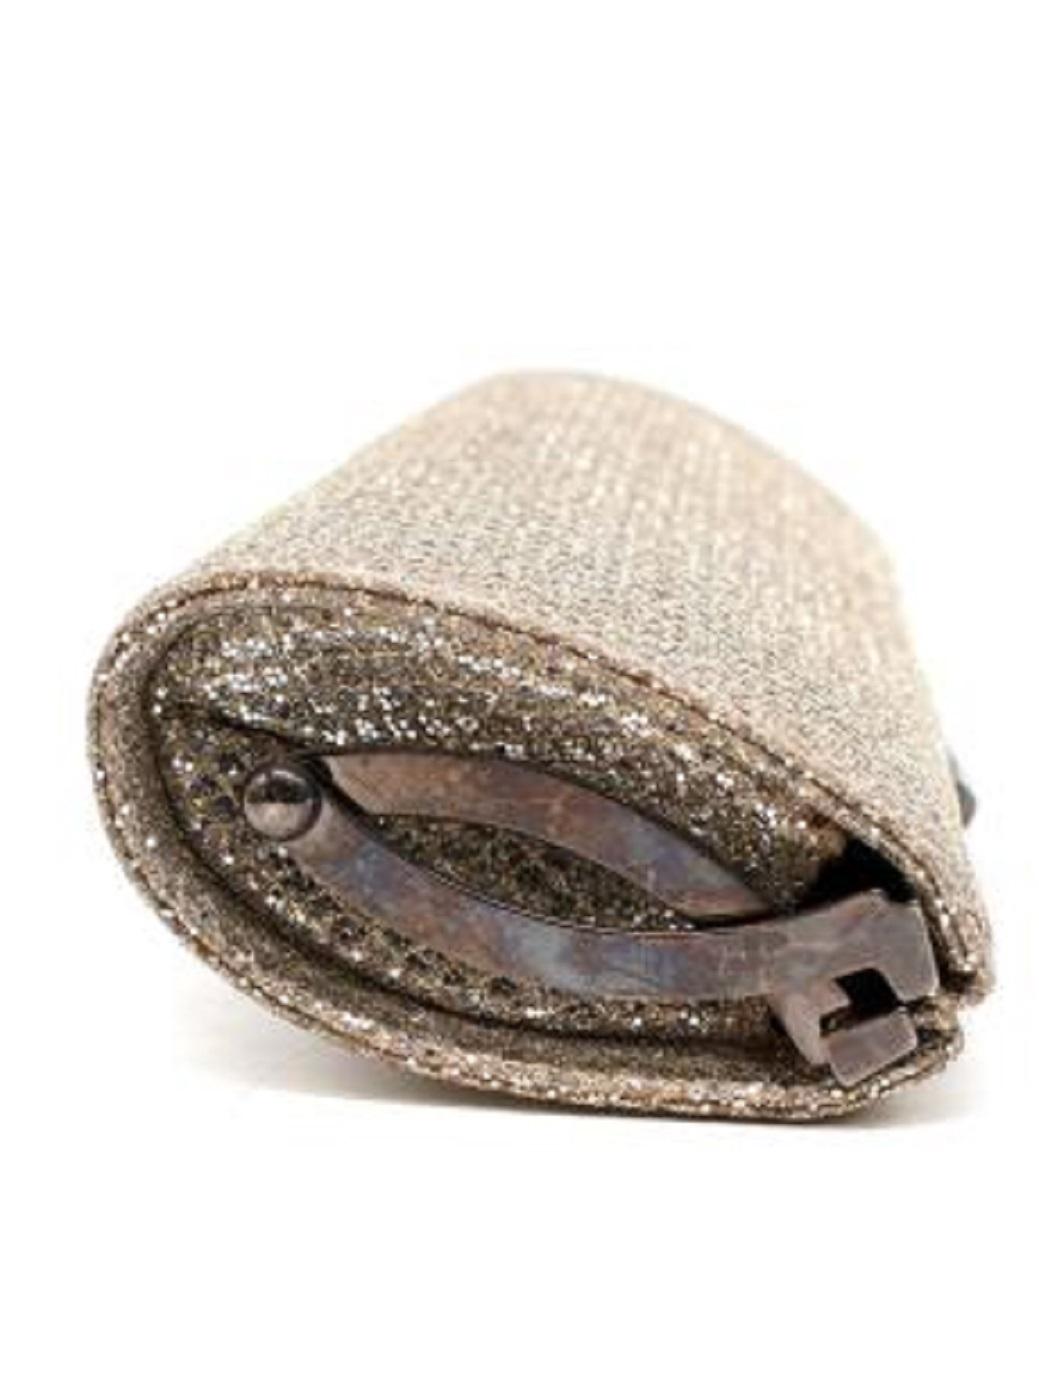 Jimmy Choo Champagne Sequin Embellished Clutch For Sale 4